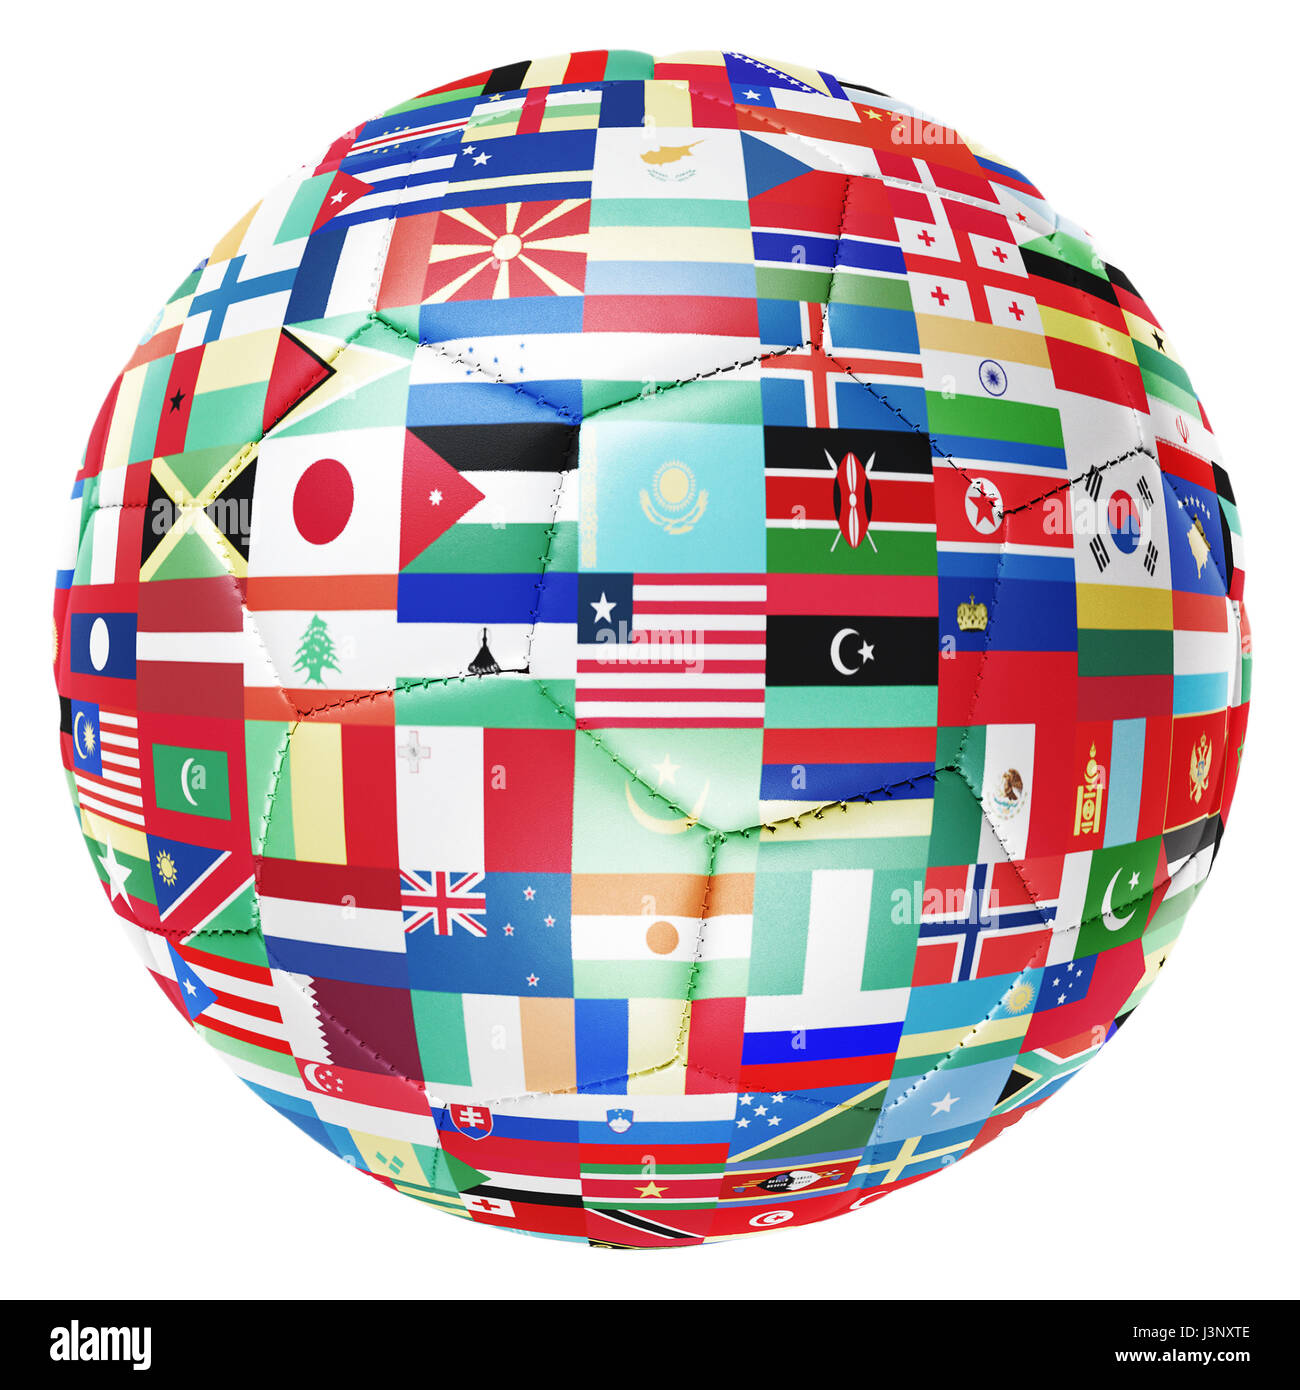 Many flags of the world superimposed onto a traditional football. Stock Photo